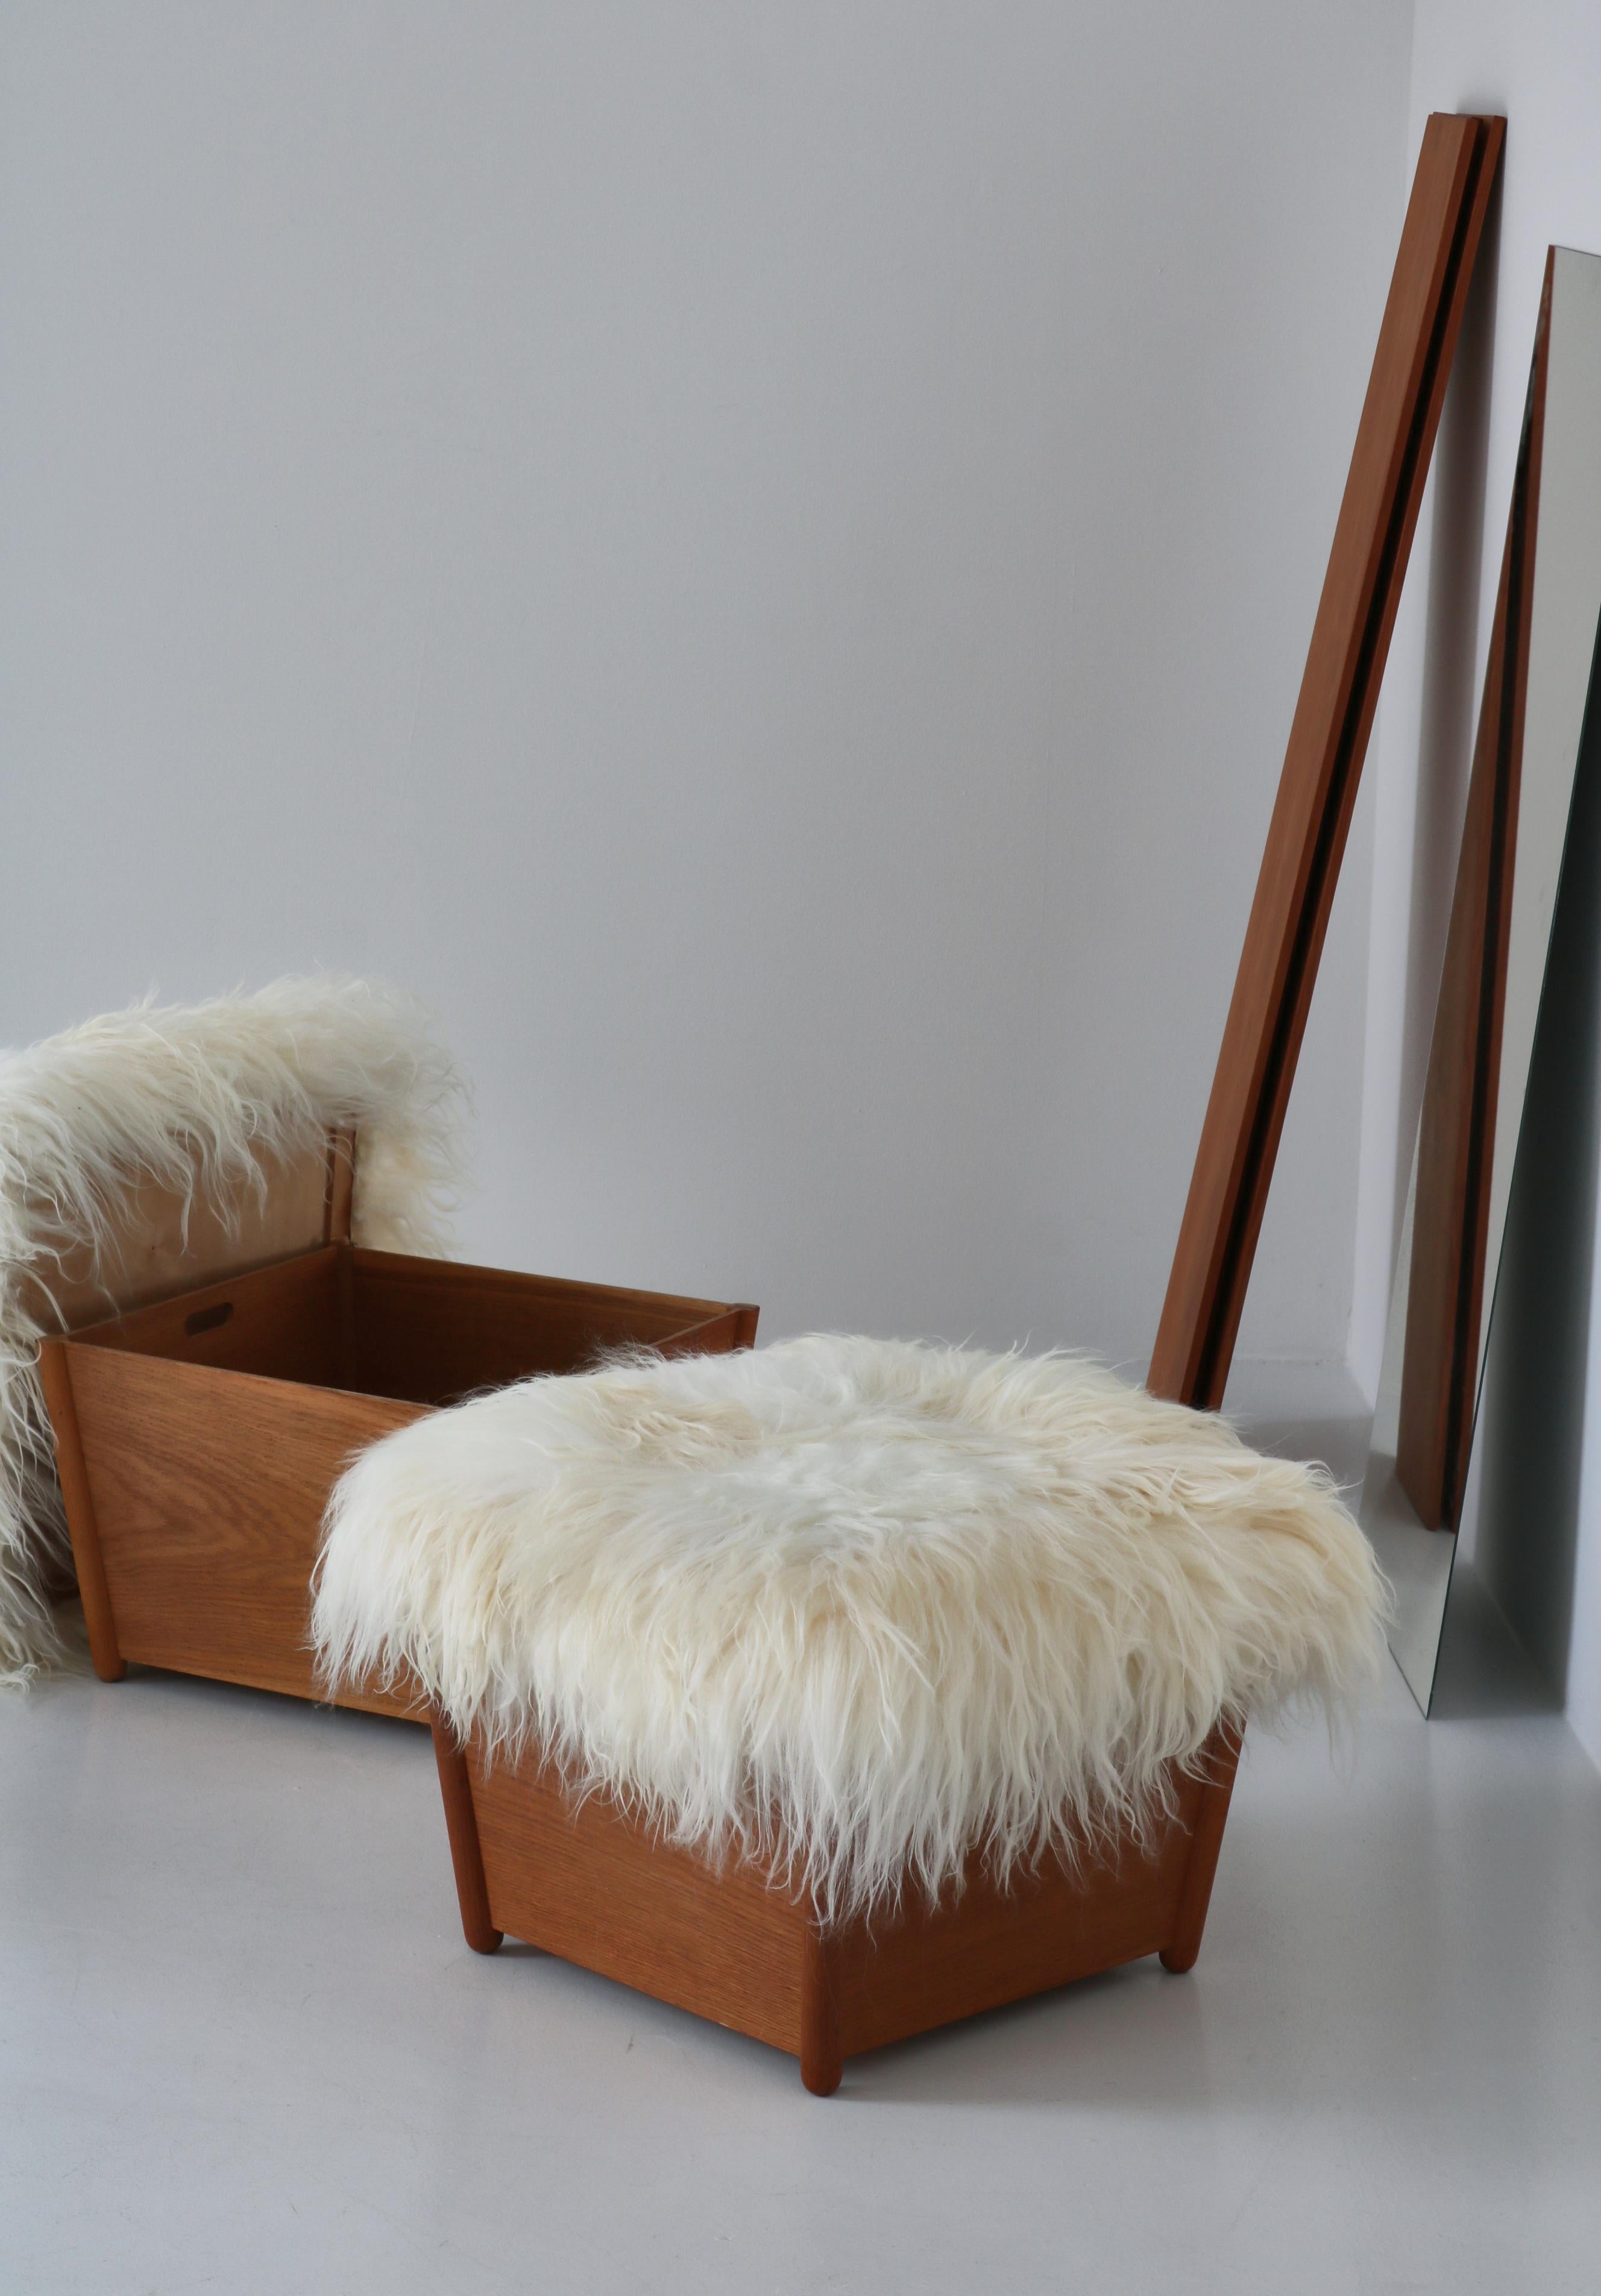 Set of charming stools by Danish Designer Arne Wahl-Iversen made in the 1960s. The stools have been reupholstered in long-haired organic sheepskin. The stools are made for storage.

Provenance: Bought directly from the estate of Wahl-Iversen.